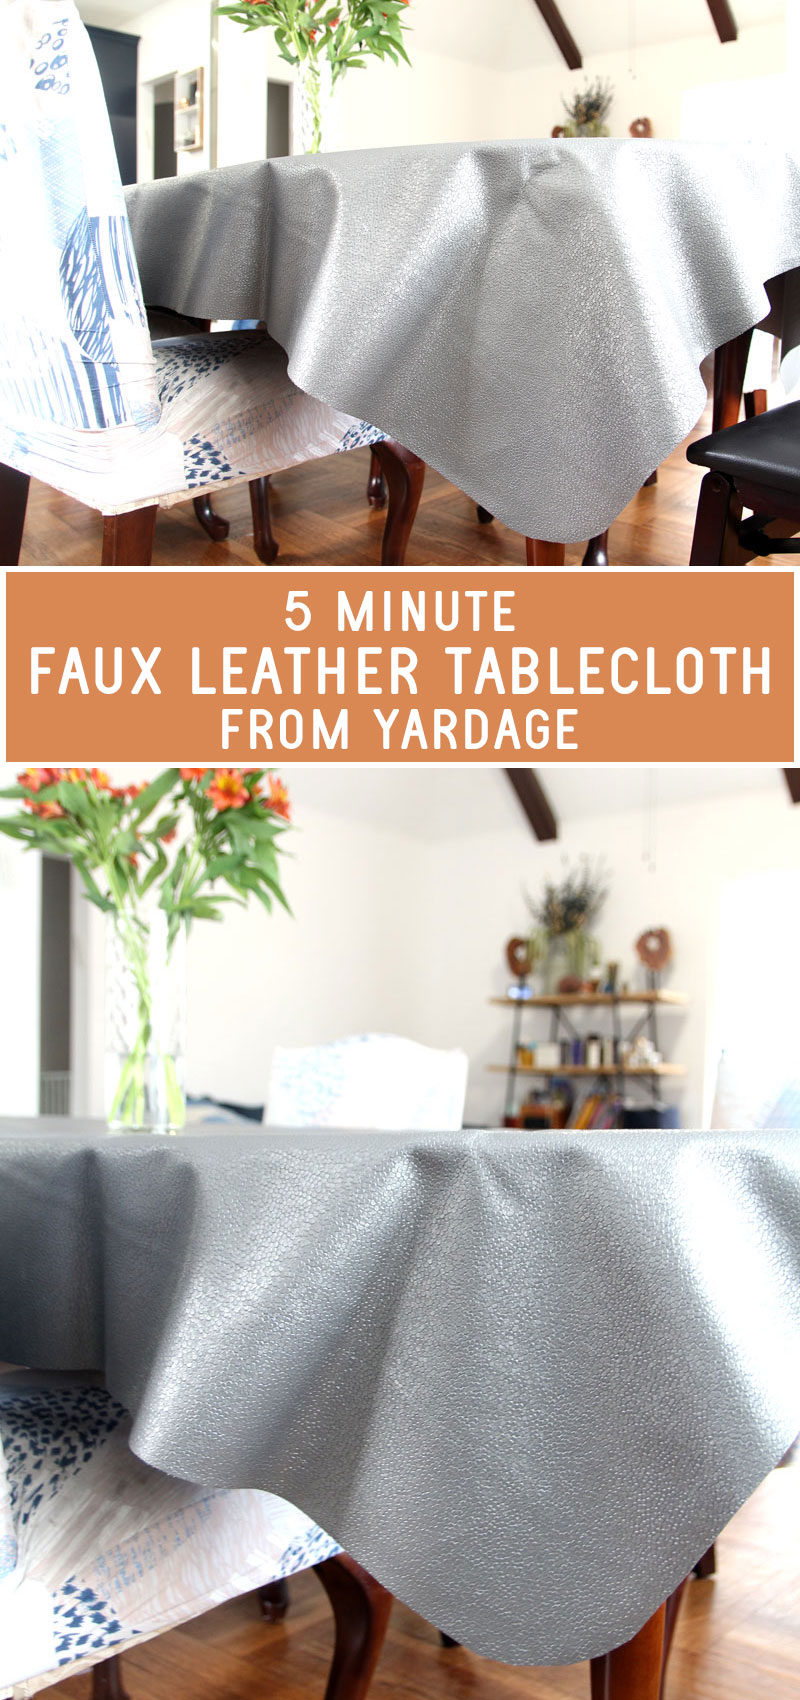 faux leather tablecloth from yardage staged hero